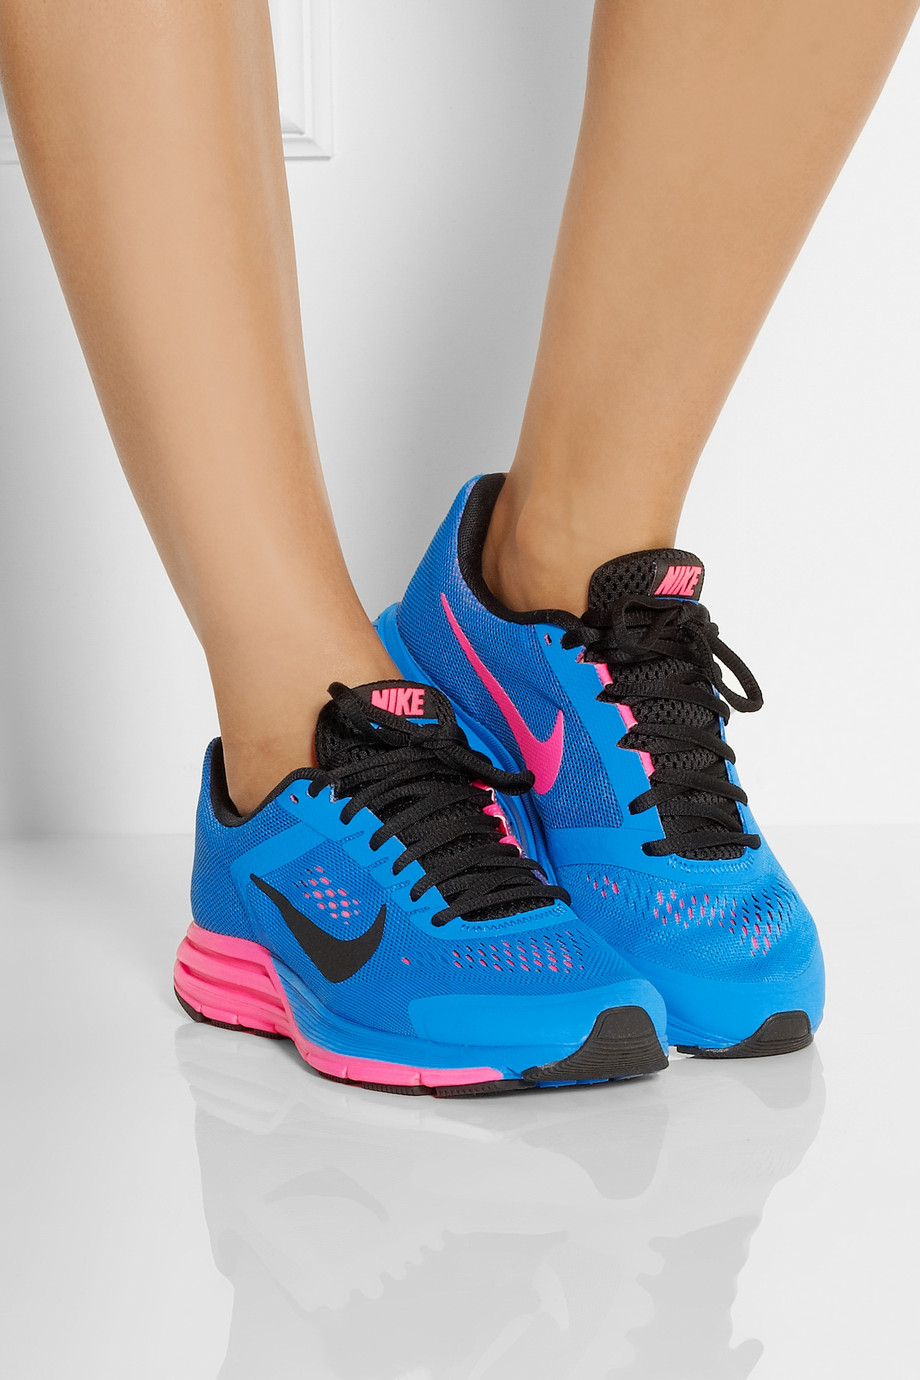 Nike Zoom Structure 17 Mesh Sneakers in Blue - Lyst